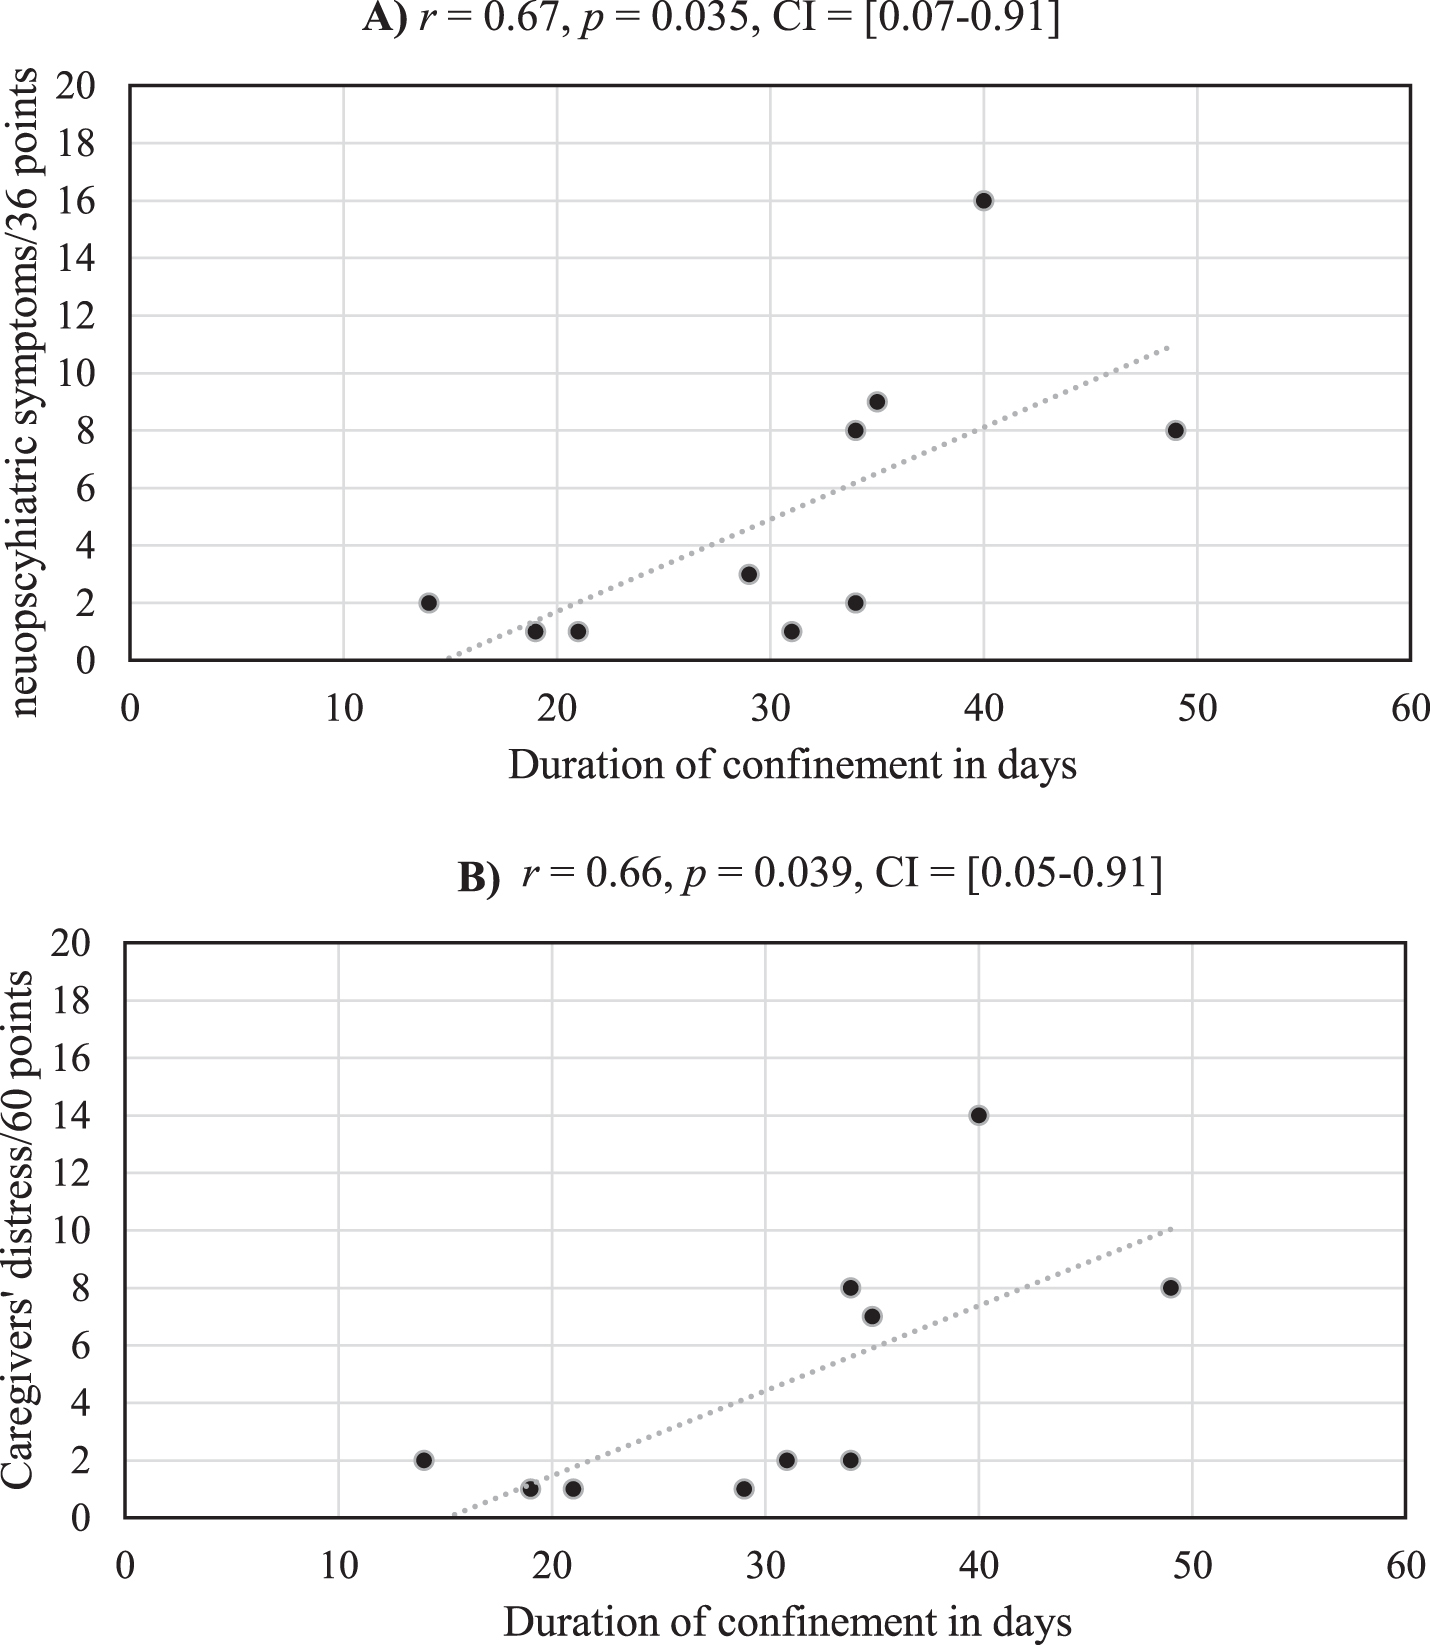 Medium strength correlations are observed between the duration of confinement and severity of neuropsychiatric symptoms (A) and their care givers’ distress (B) for the 10 AD patients who experienced neuropsychiatric changes during the confinement.